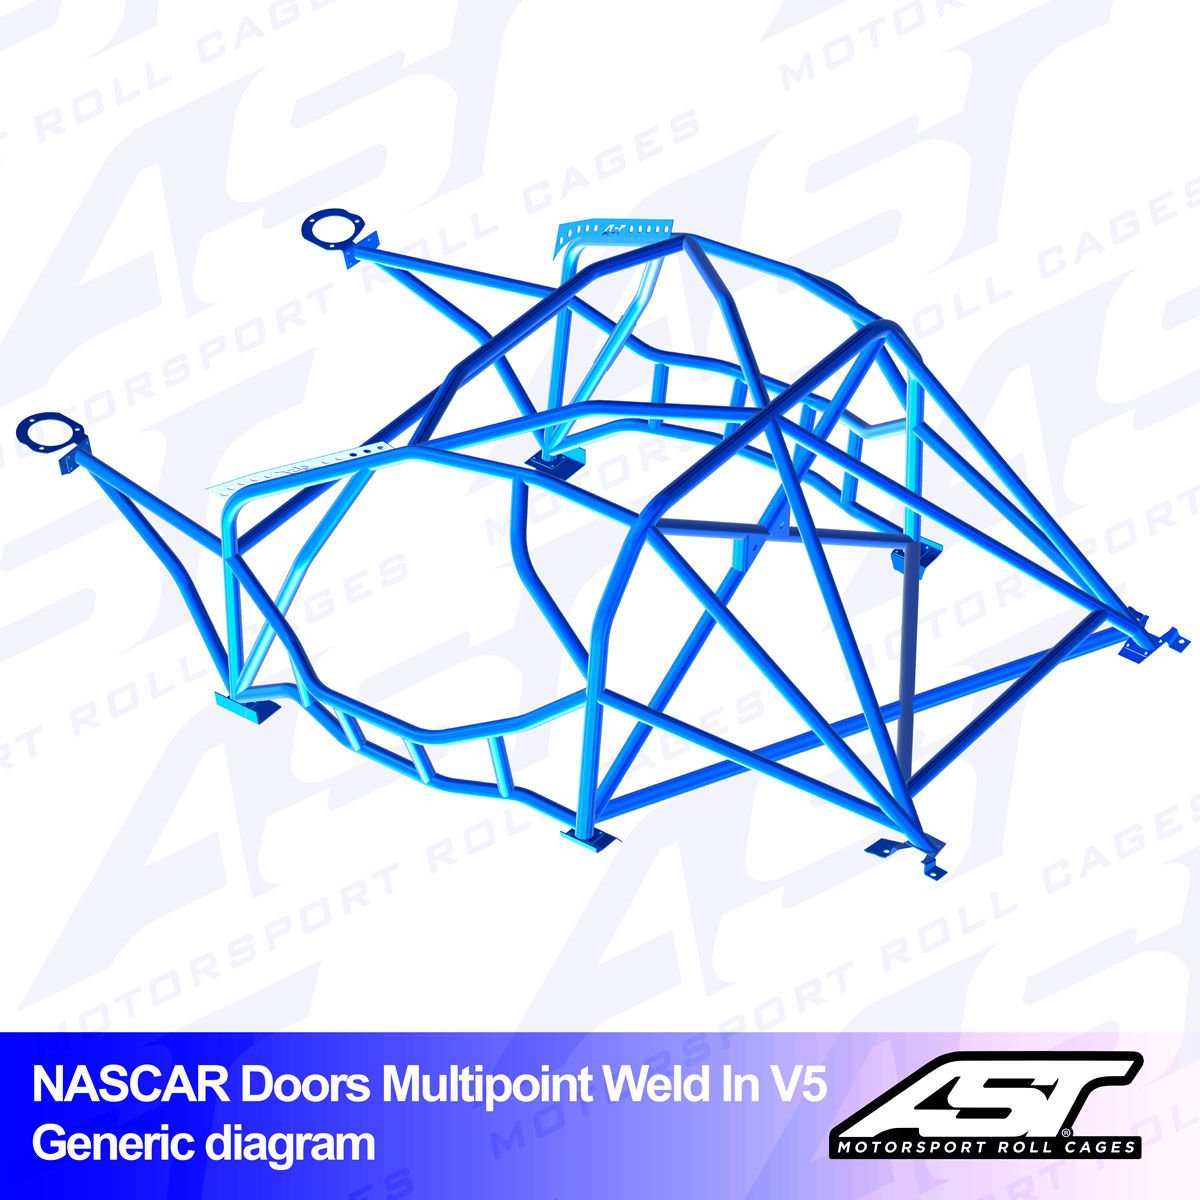 copy of Roll Cage BMW (E91) 3-Series 5-doors Touring RWD MULTIPOINT WELD IN V5 NASCAR-door for drift